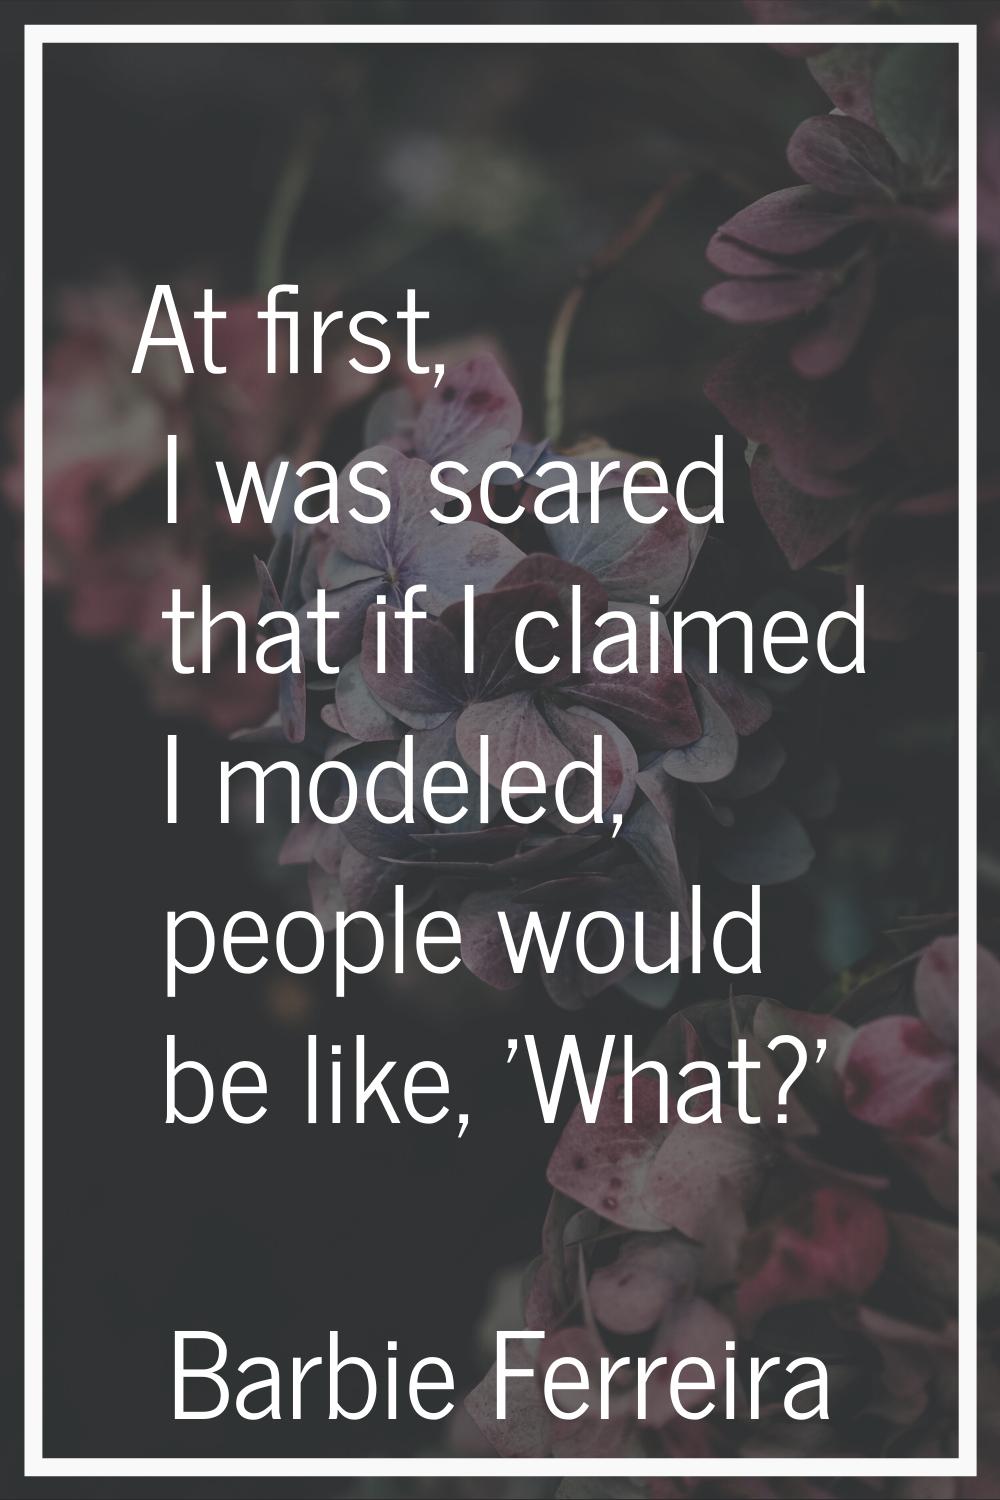 At first, I was scared that if I claimed I modeled, people would be like, 'What?'